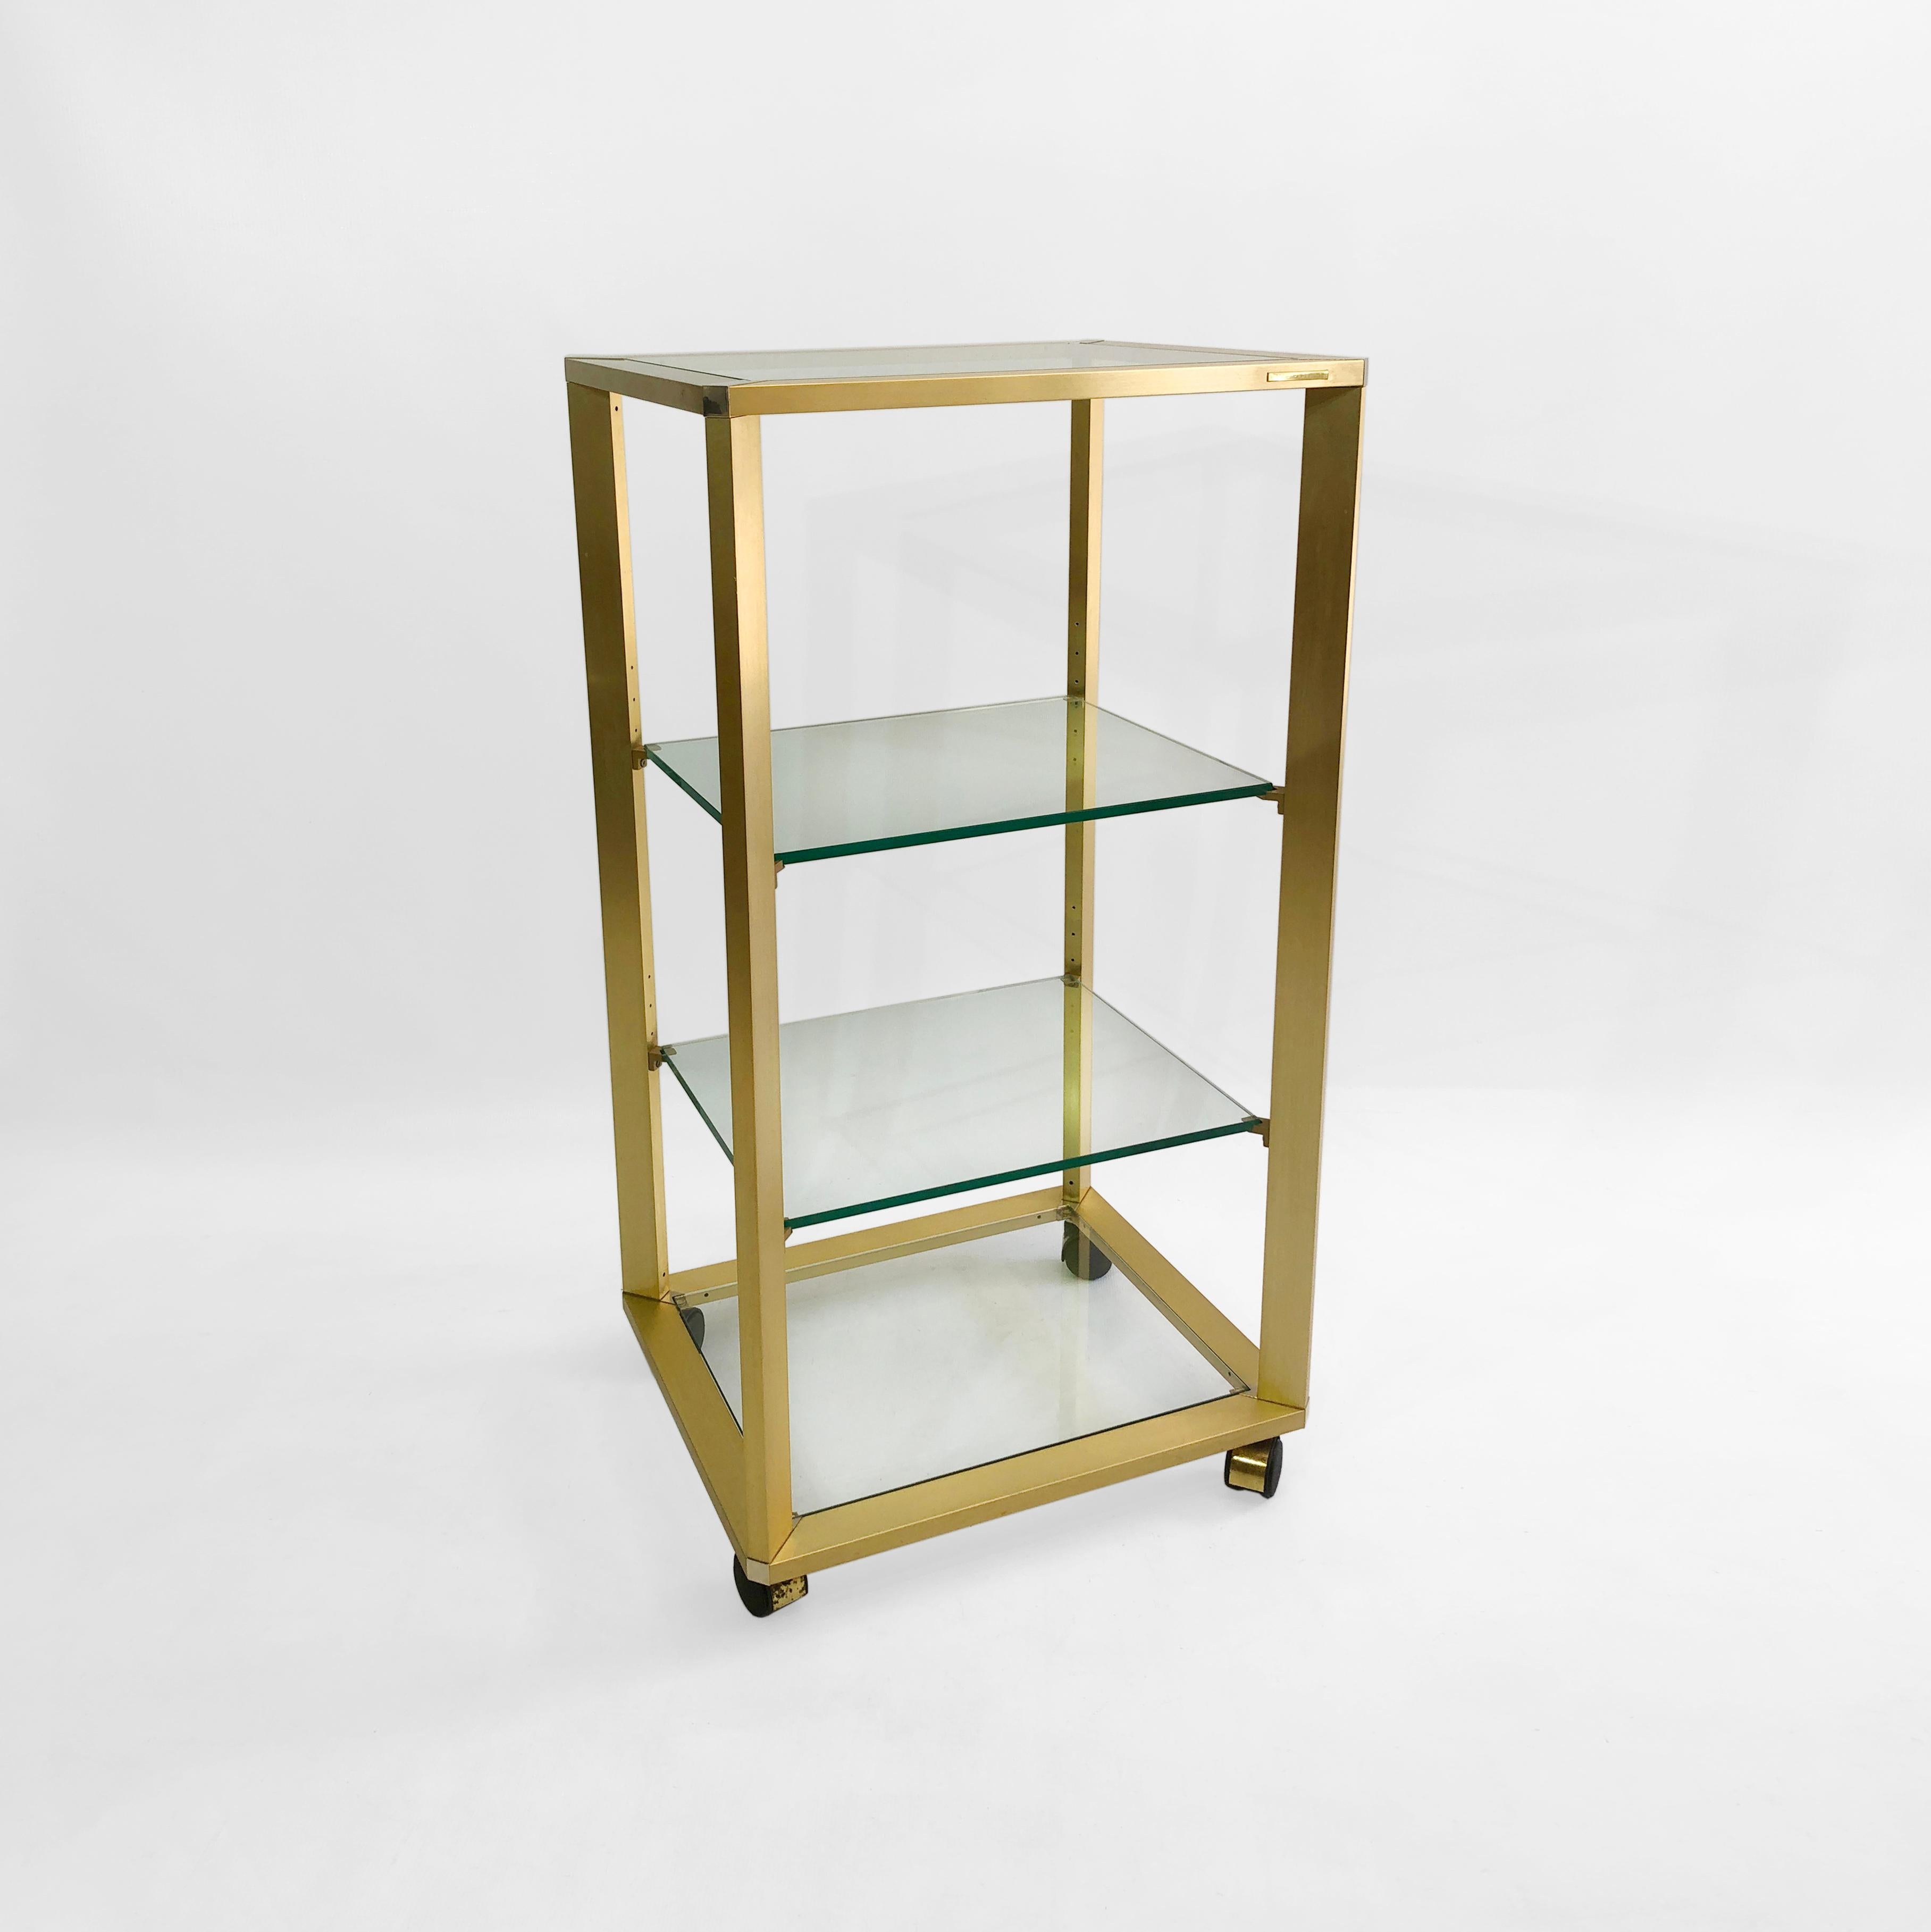 This gold, waist high étagère, is a rarely seen piece of Pierre Vandel design - but has all the hallmarks of his best work. The four-shelved unit is mounted on to four metal swivel castor wheels, allowing for free movement. The frame is gold-plated